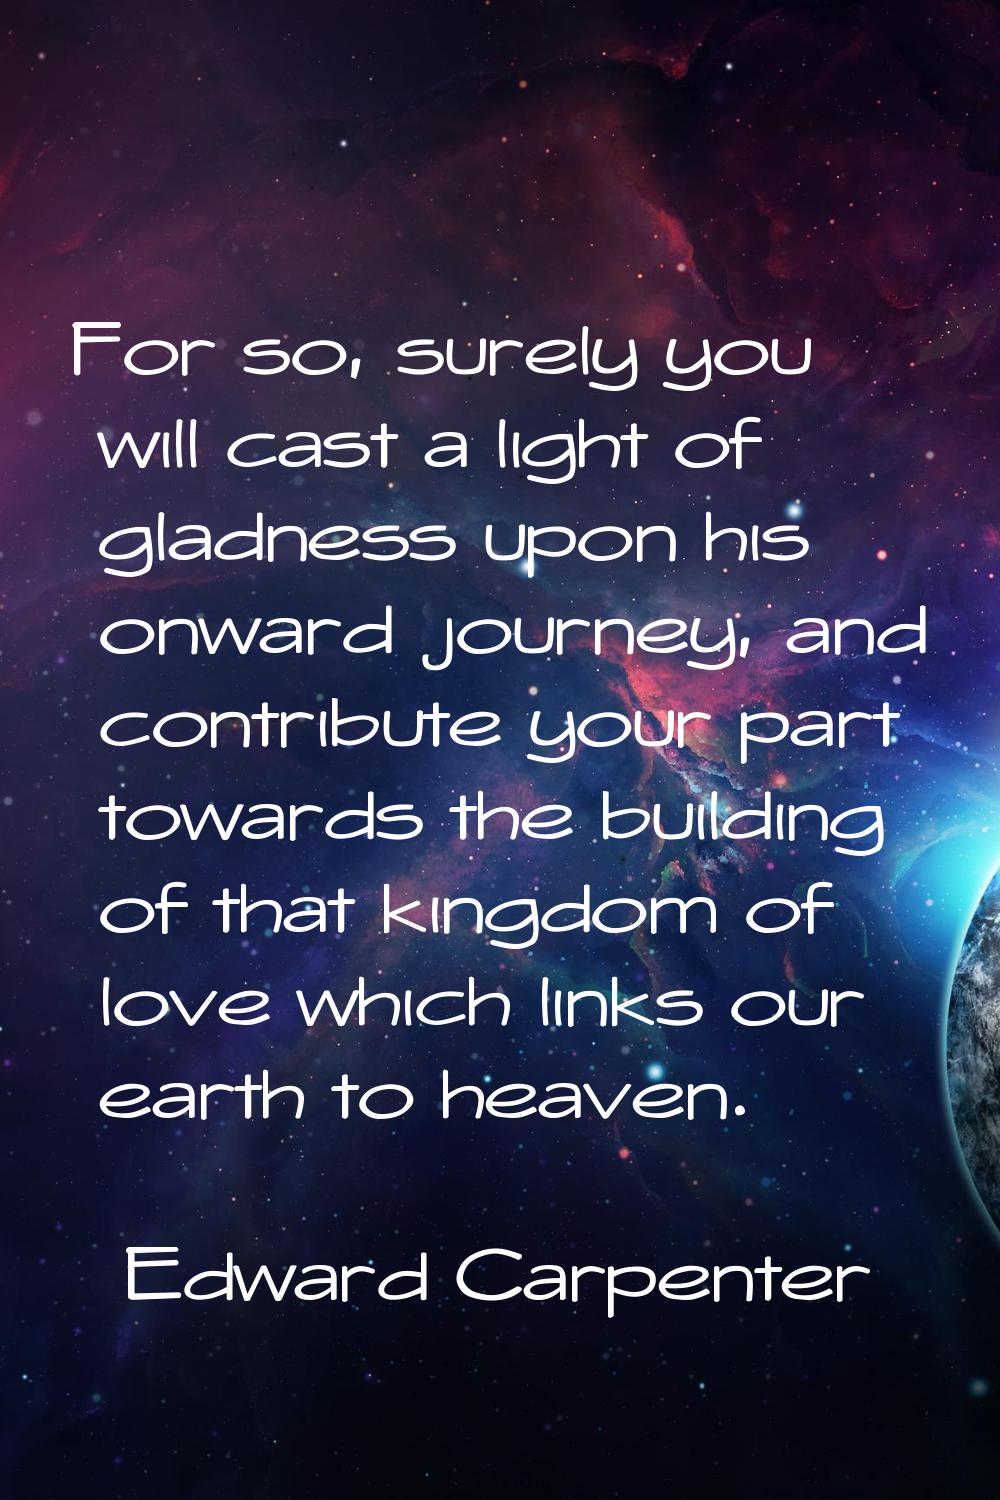 For so, surely you will cast a light of gladness upon his onward journey, and contribute your part 